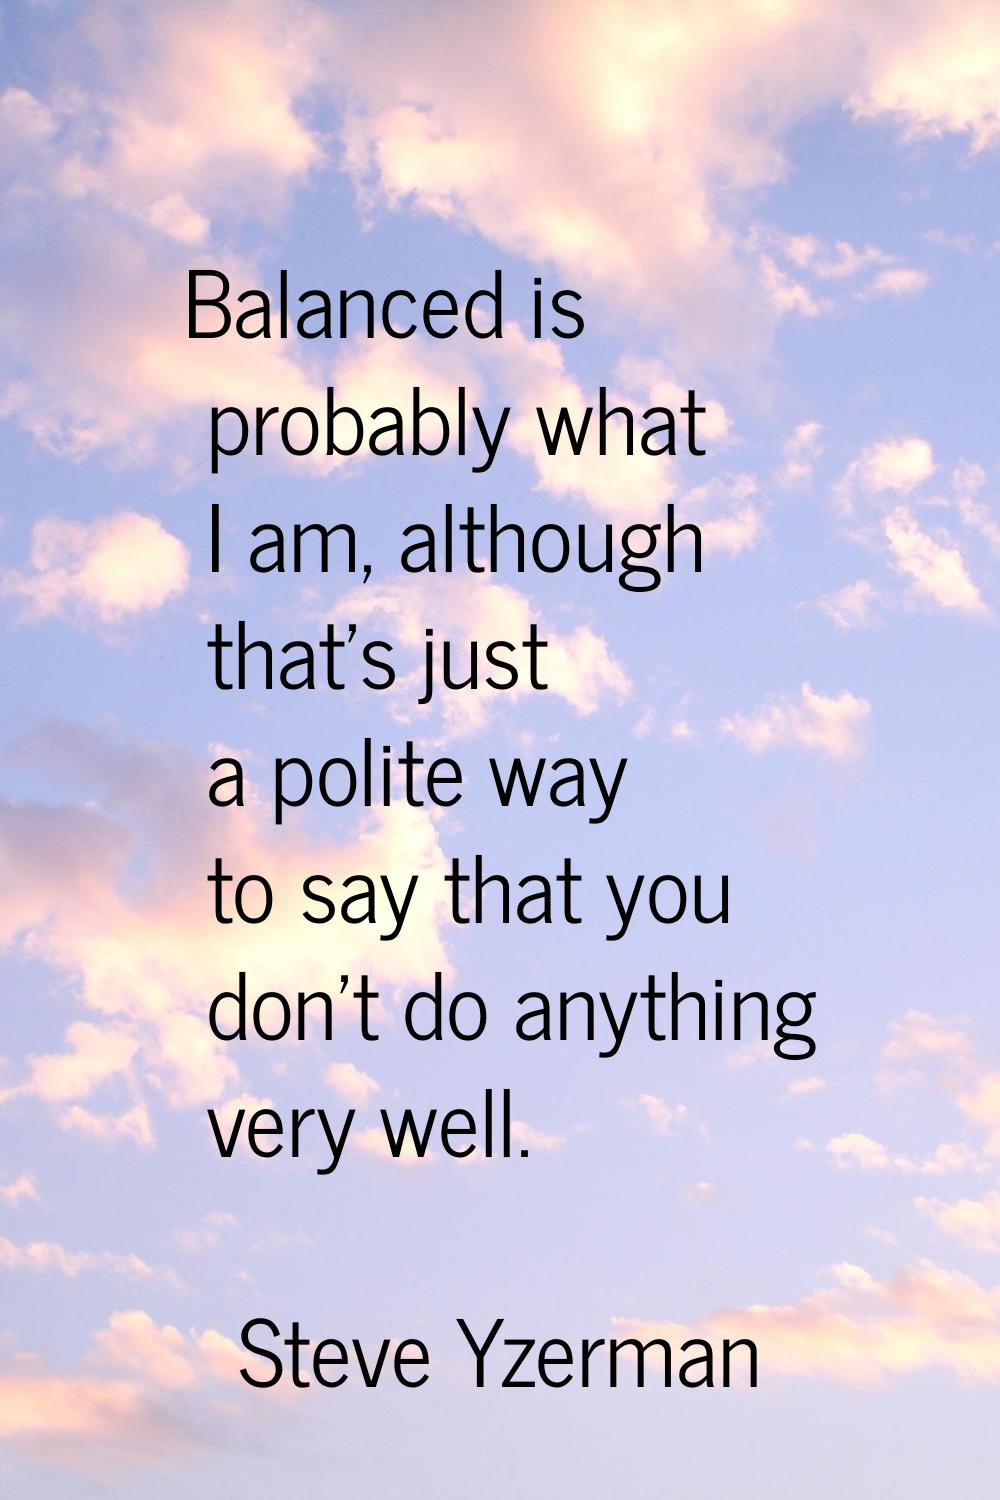 Balanced is probably what I am, although that's just a polite way to say that you don't do anything